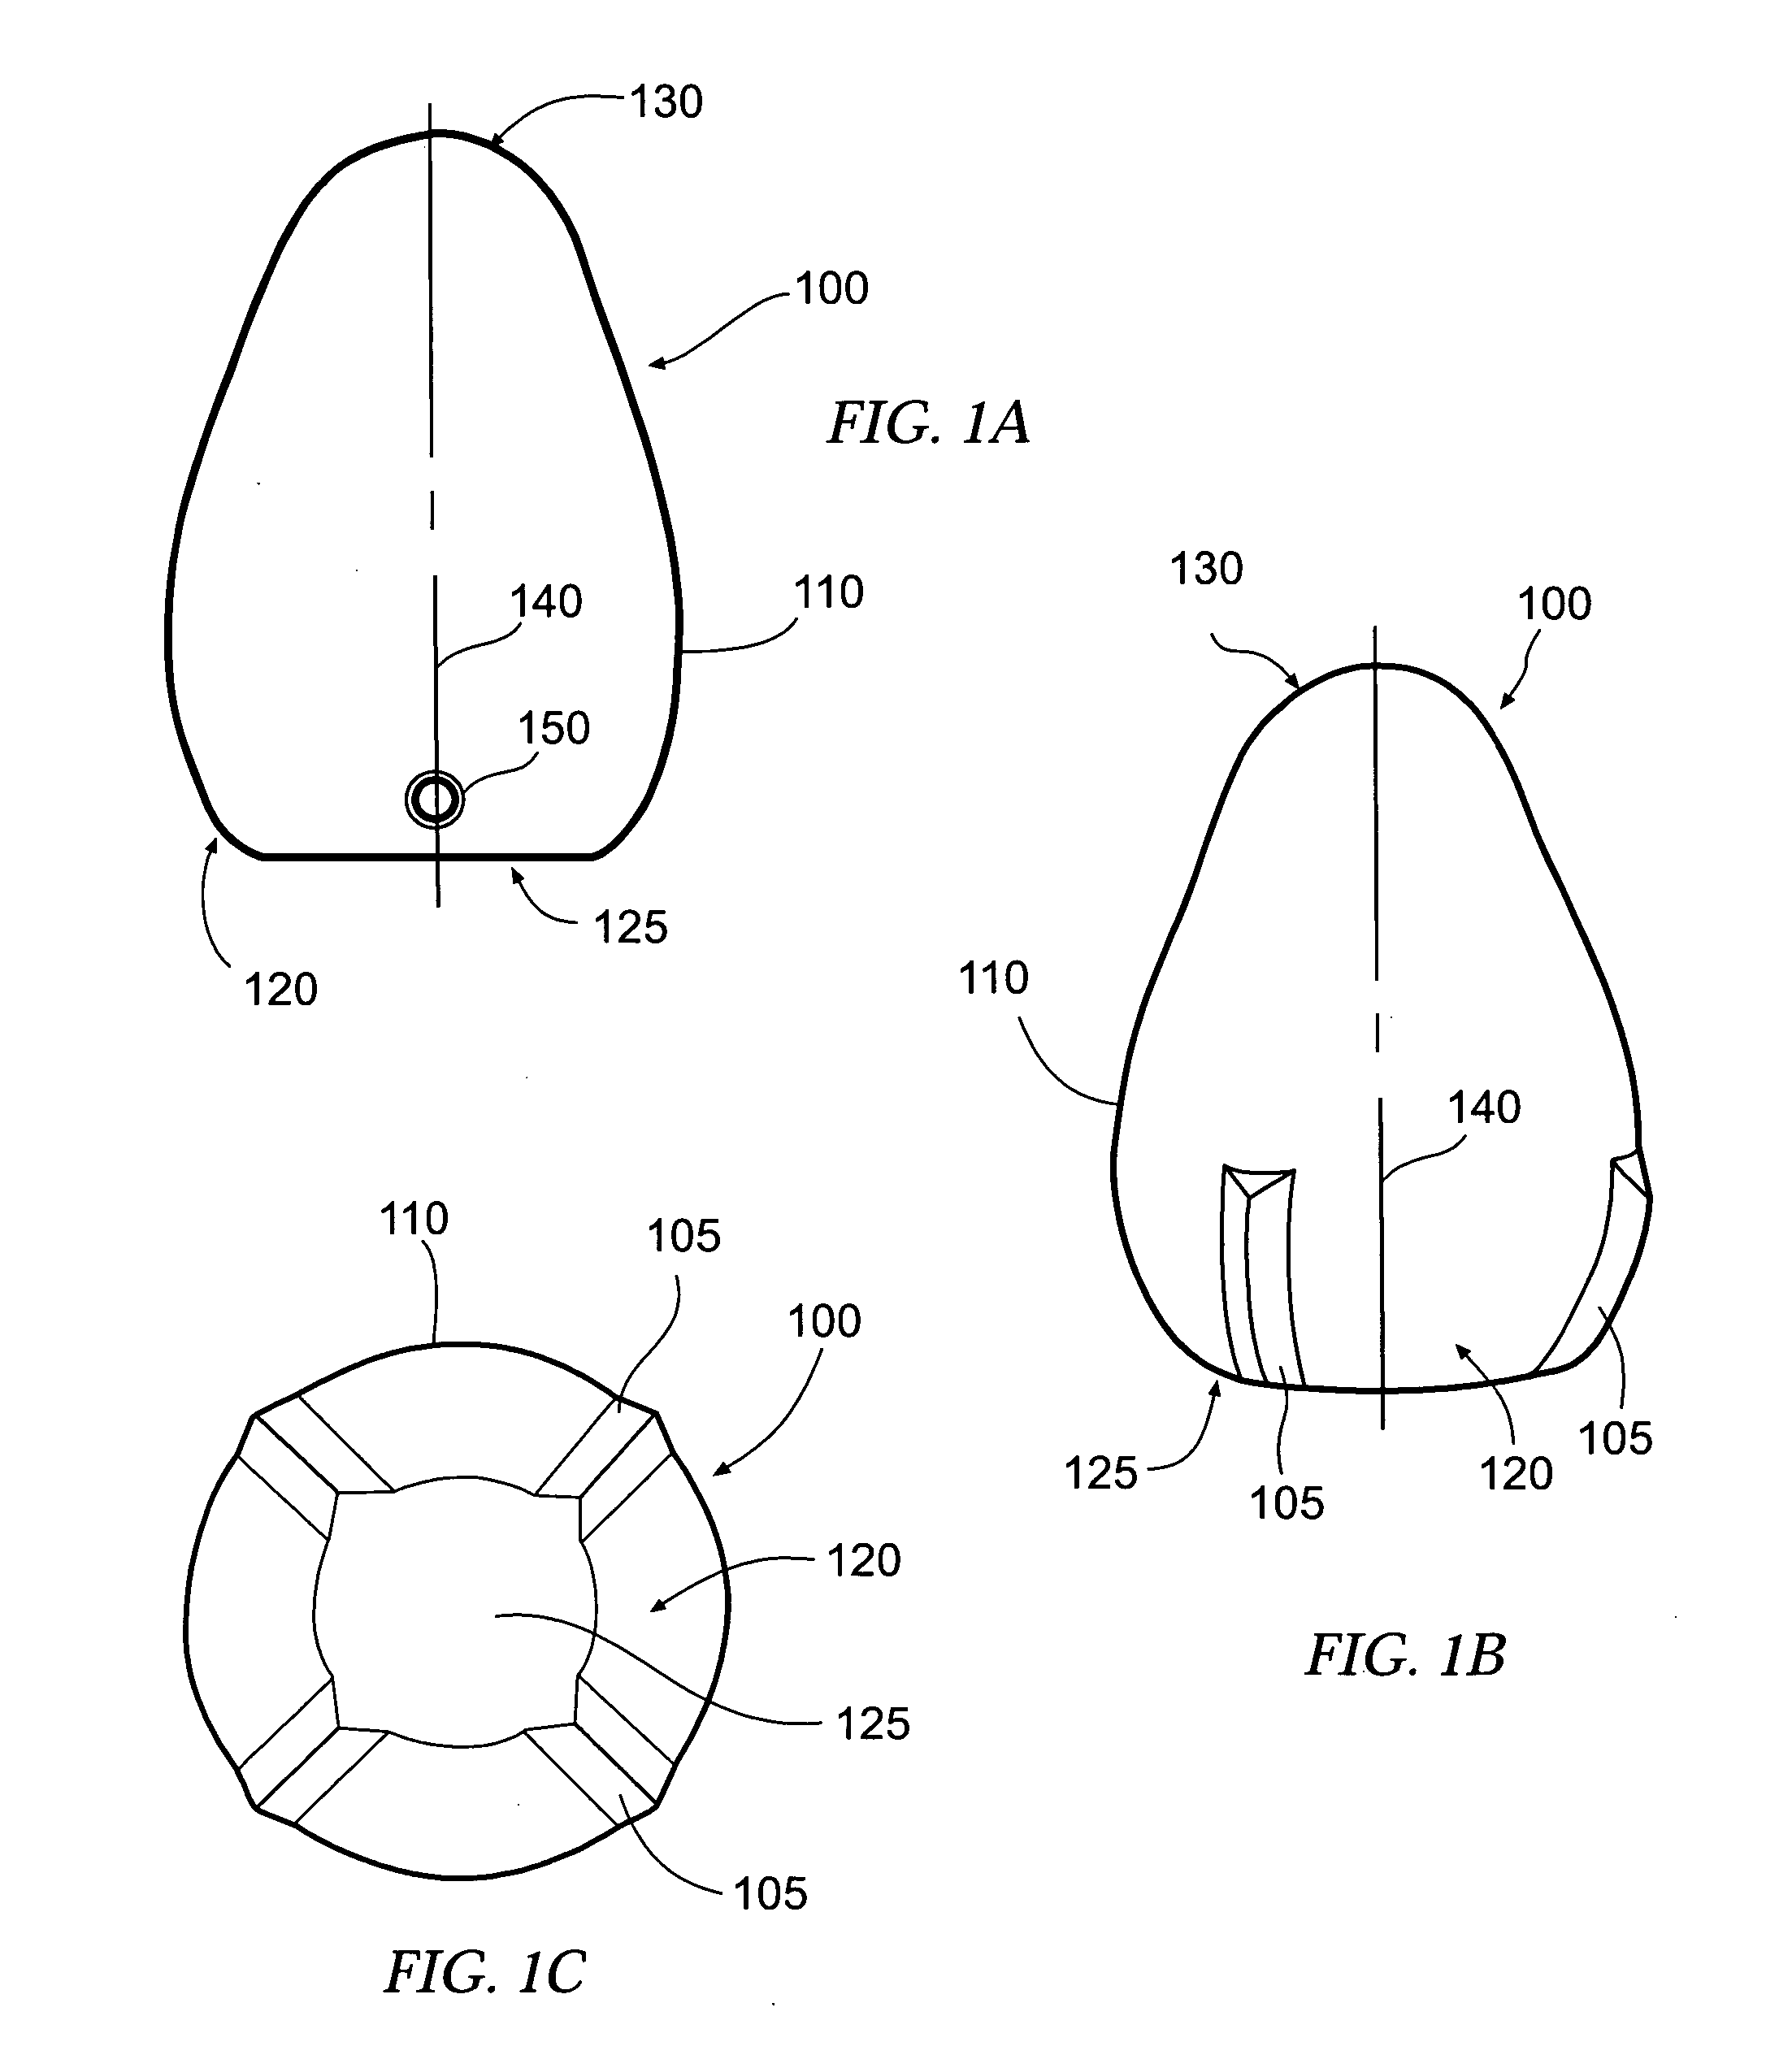 Deployable monitoring device having self-righting housing and associated method